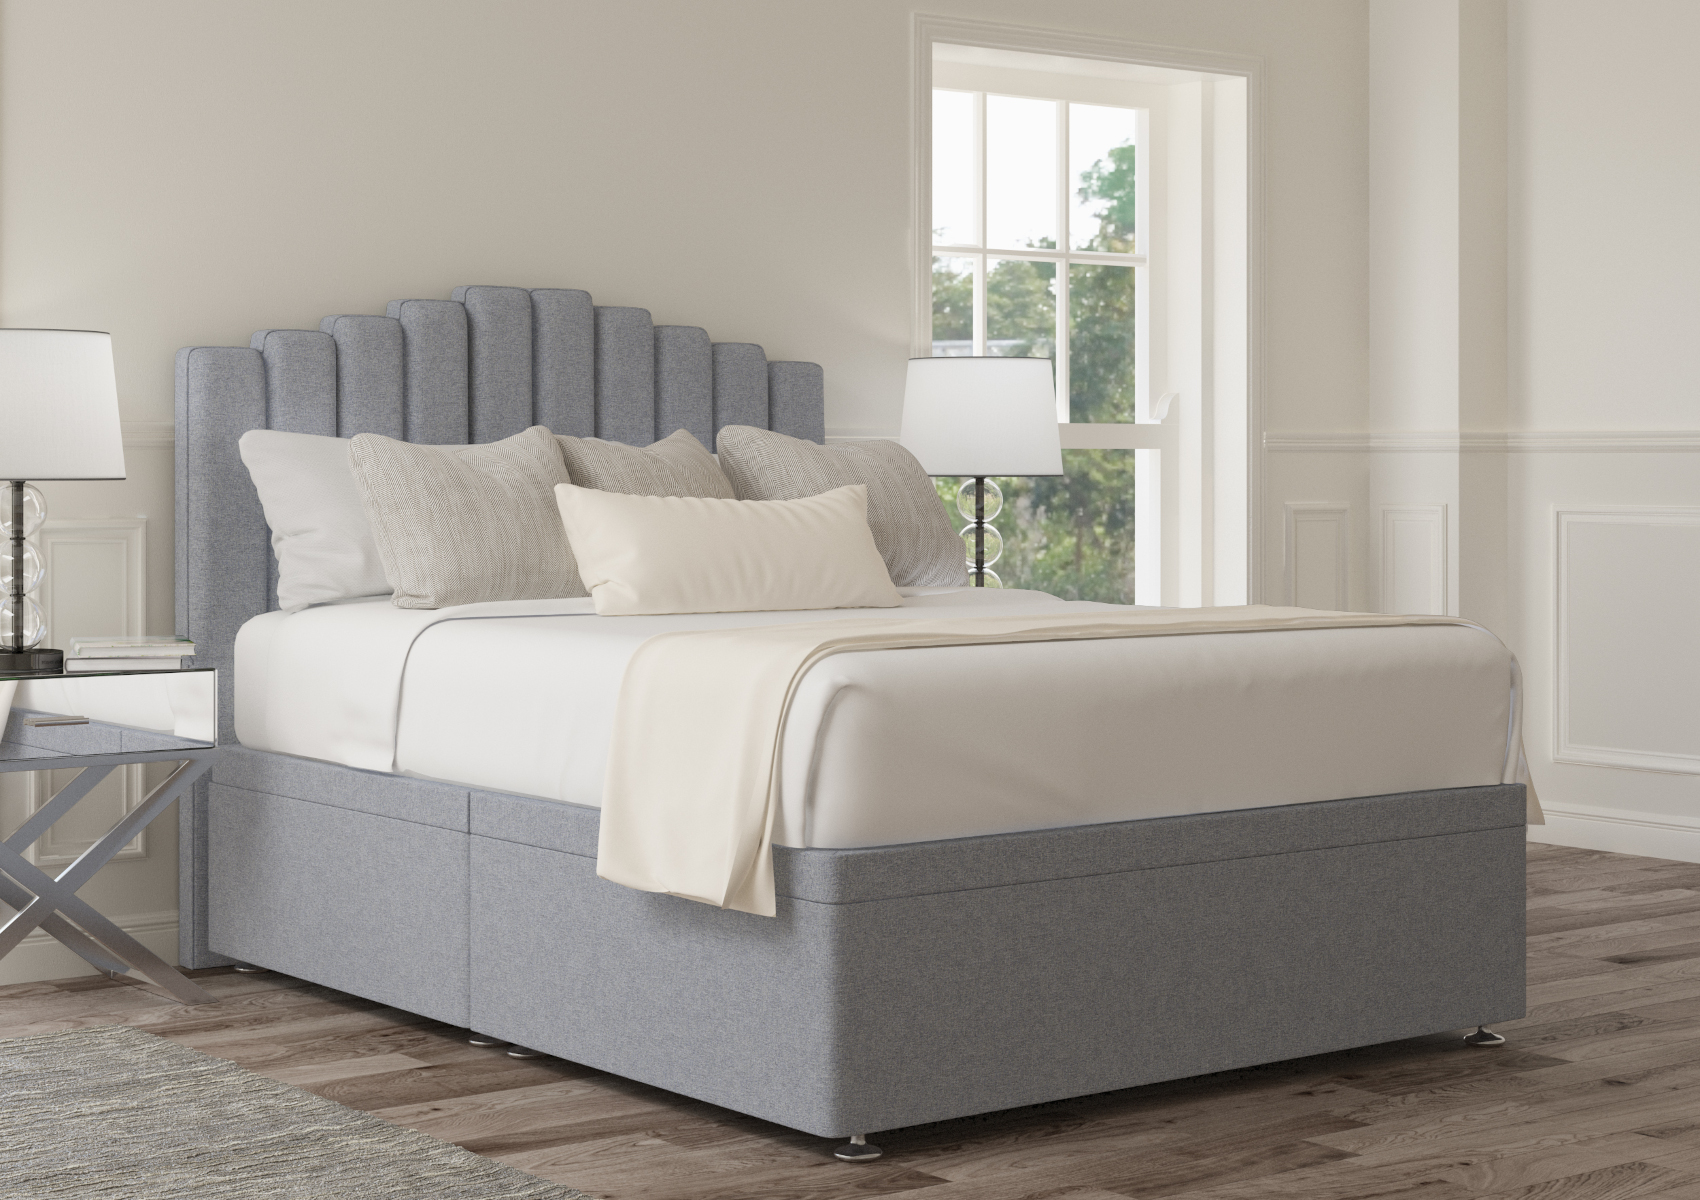 View Quinn Trebla Stone Upholstered King Size Ottoman Bed Time4Sleep information